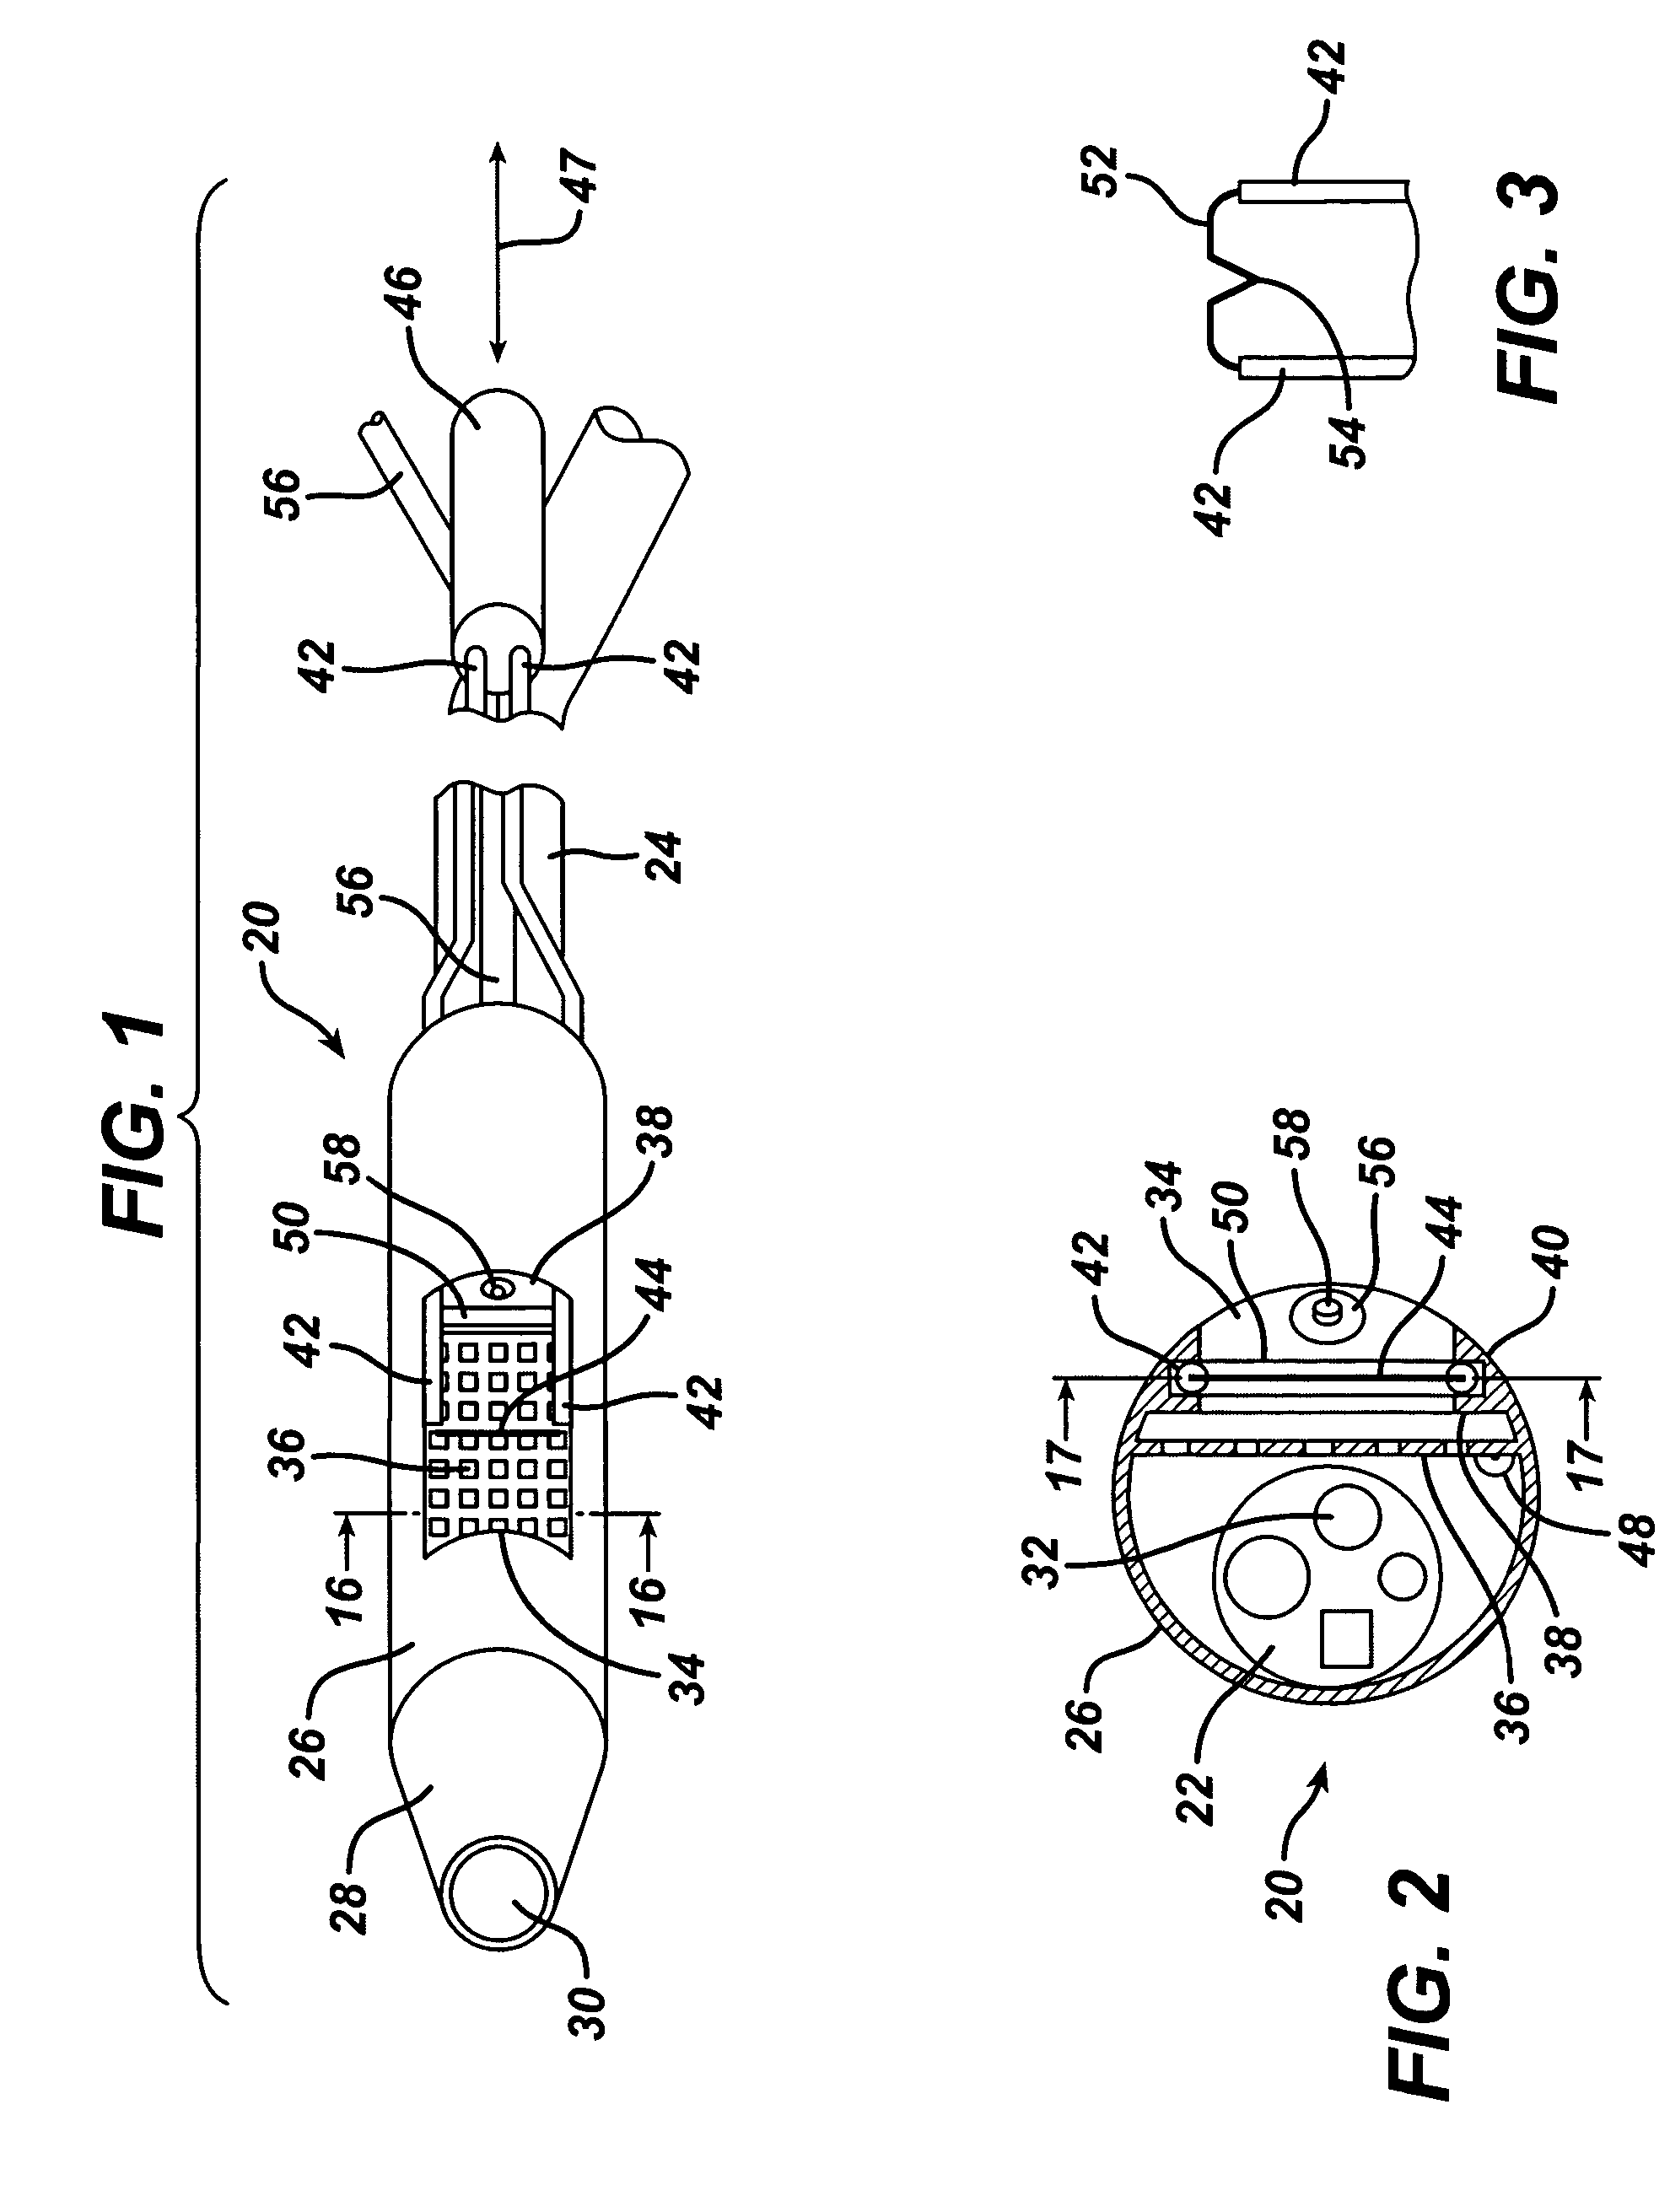 Endoscopic mucosal resection device with overtube and method of use